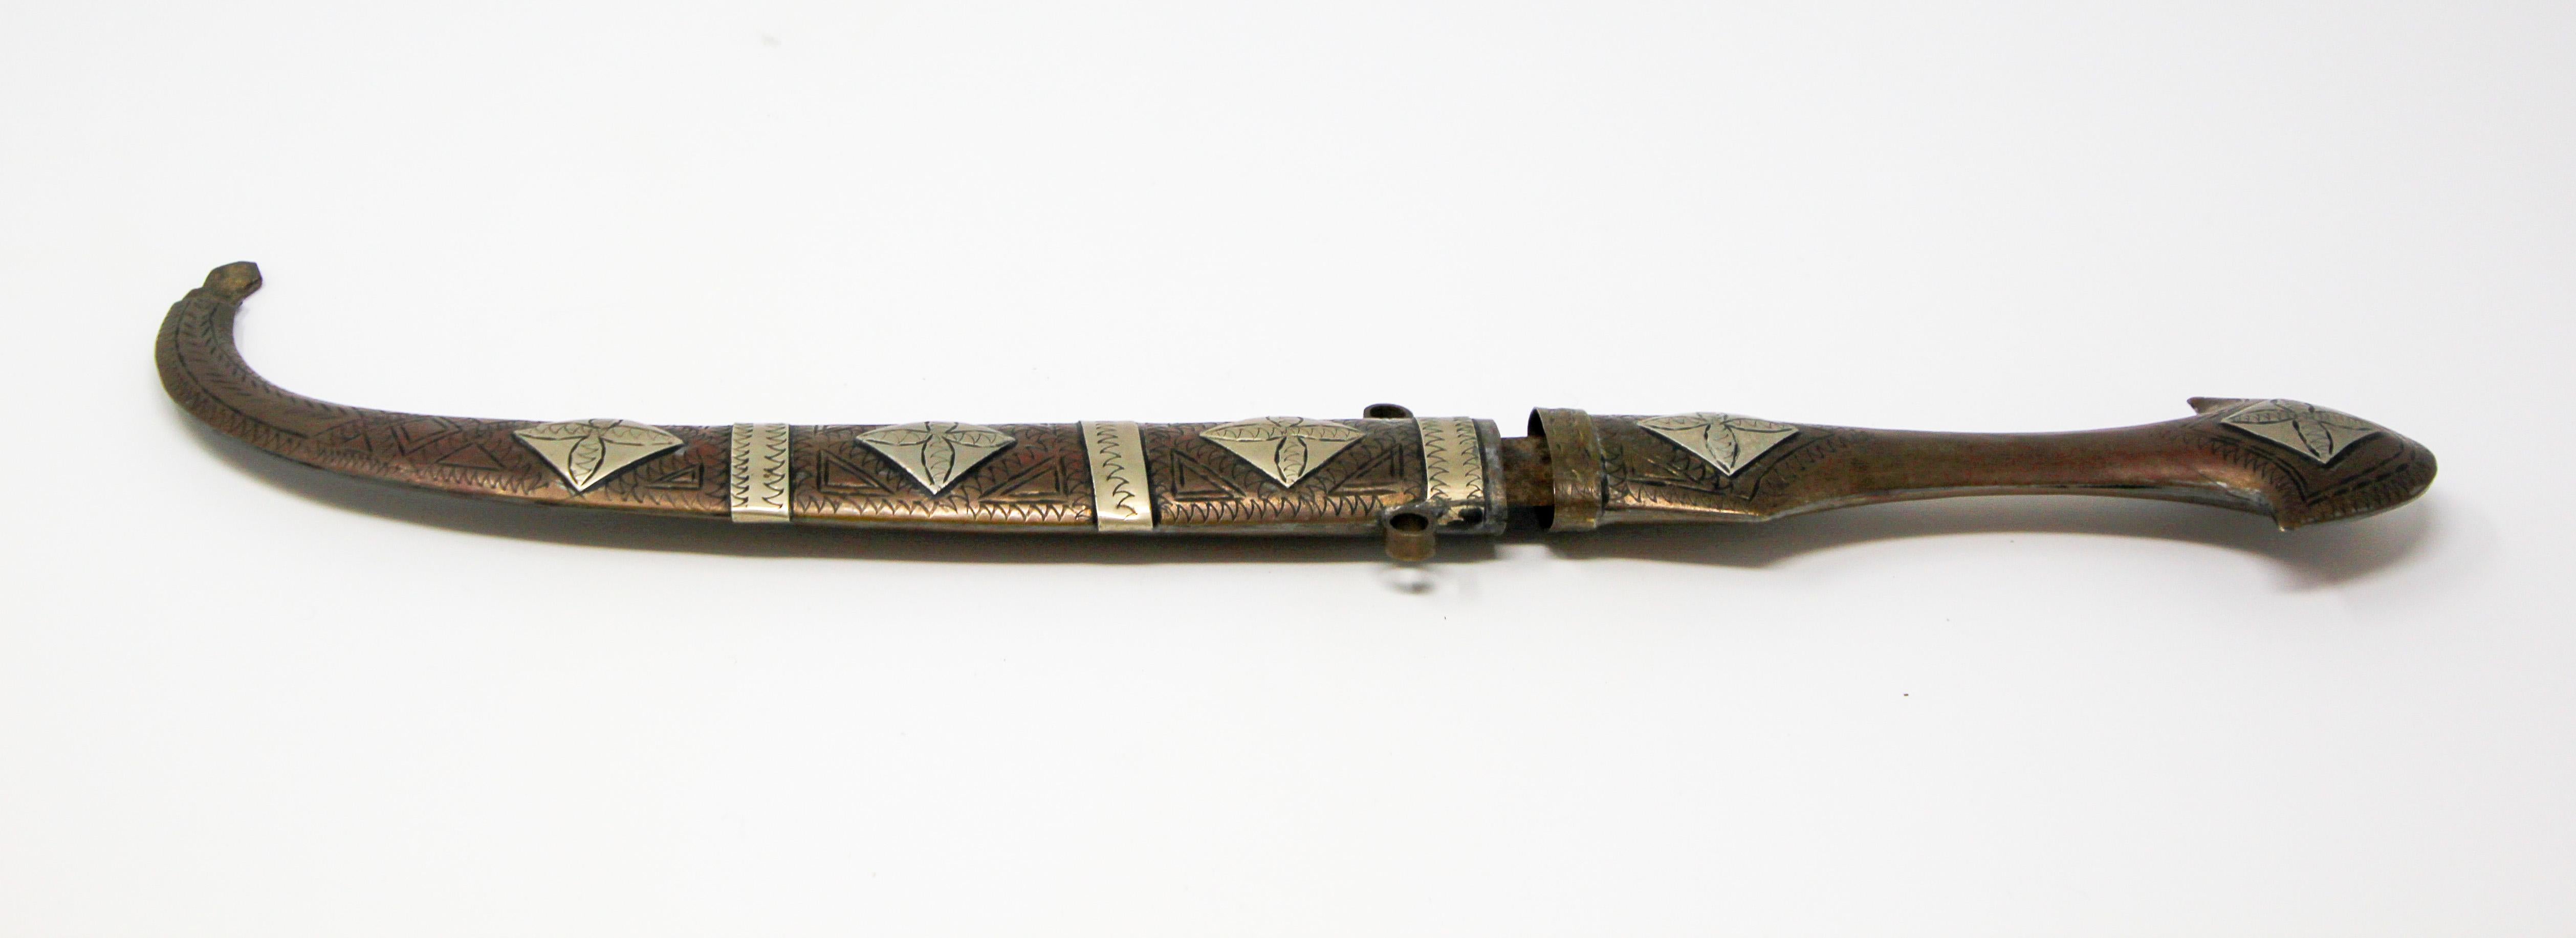 Moroccan Dagger Brass and Silver Decorative Collector Khoumya In Good Condition For Sale In North Hollywood, CA